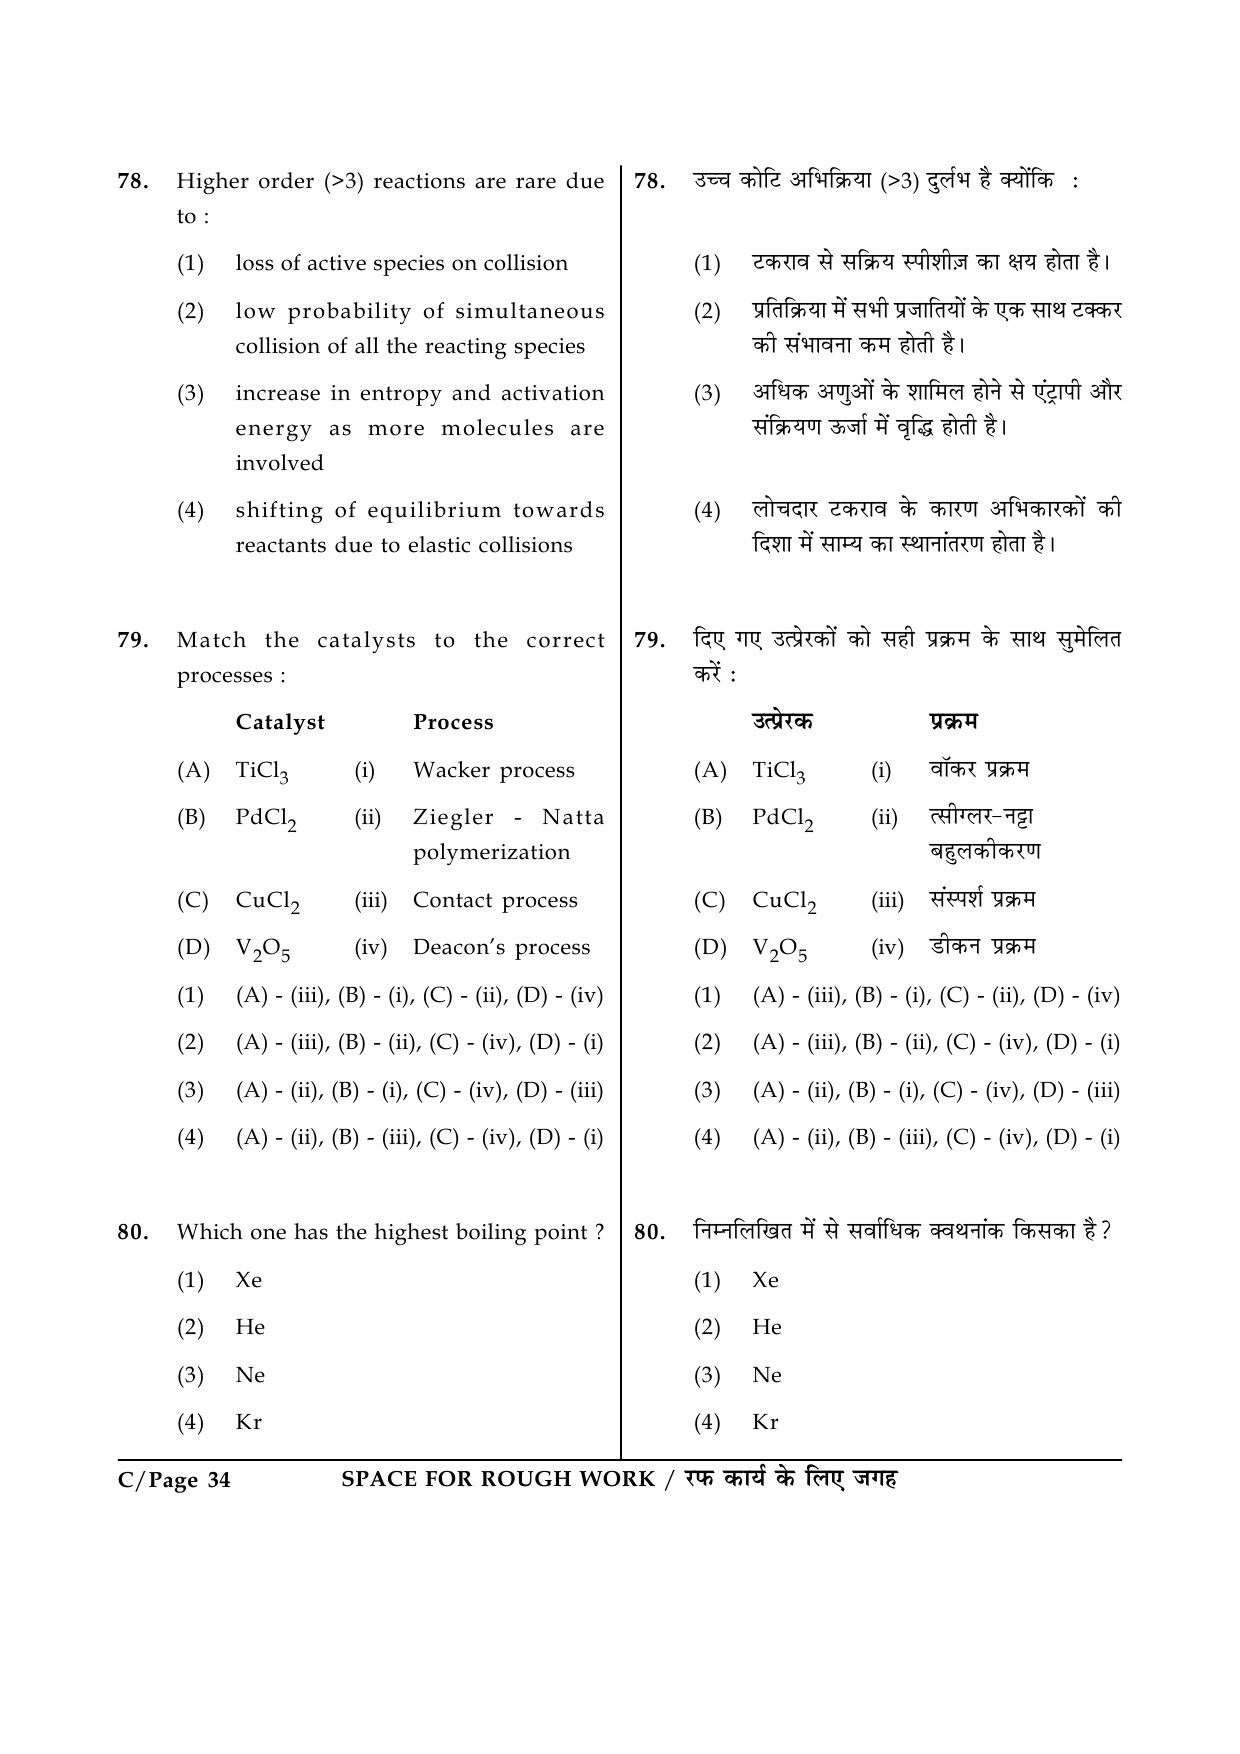 JEE Main Exam Question Paper 2015 Booklet C 34